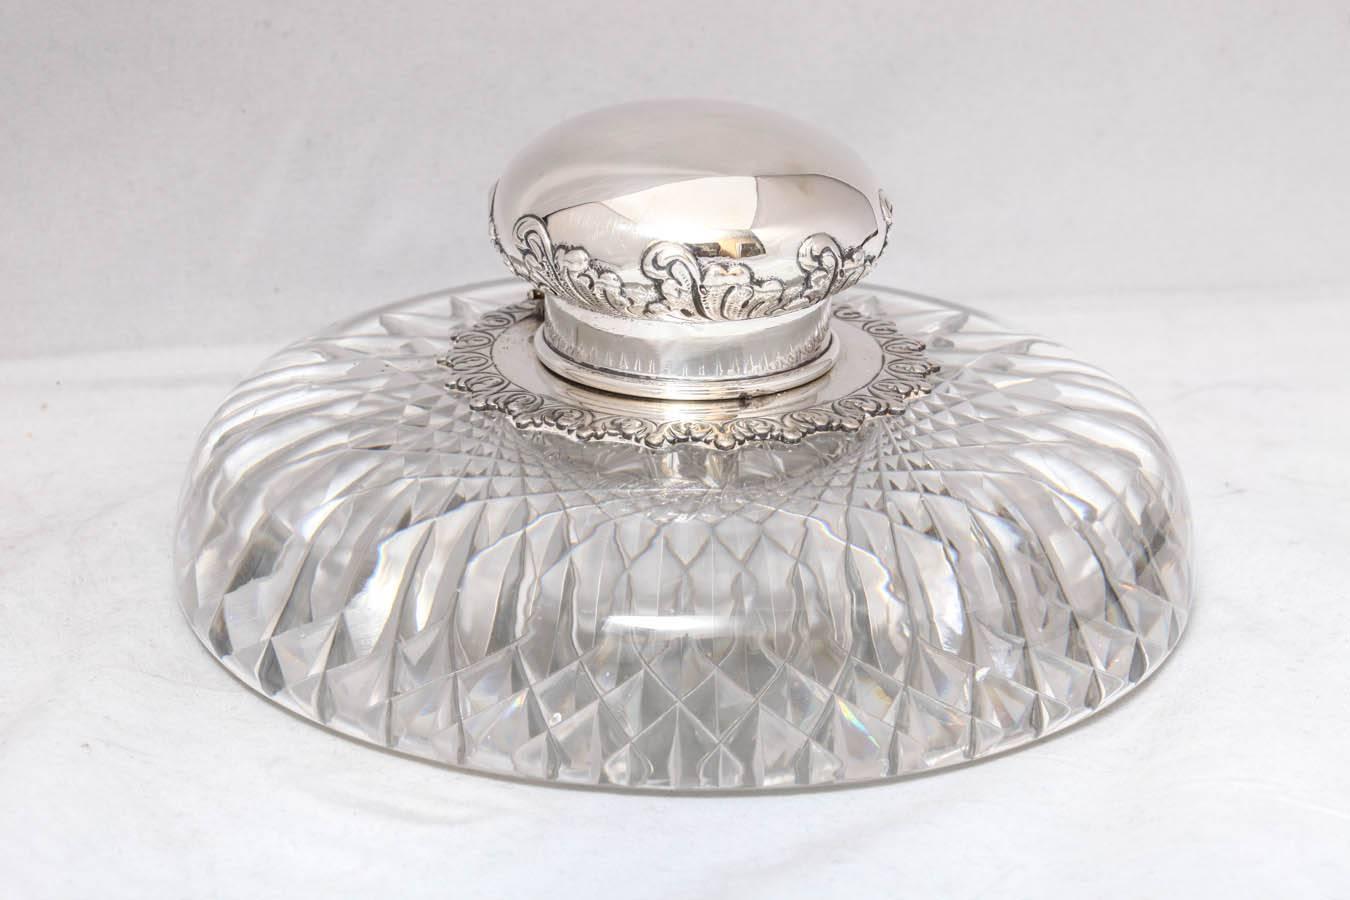 Beautiful, very large, Victorian, sterling silver-mounted crystal inkwell with hinged lid, Tiffany & Company, New York, circa 1895. Crystal is uncut except for the underside, which is cut in a diamond pattern. The diamond cuts are visible through